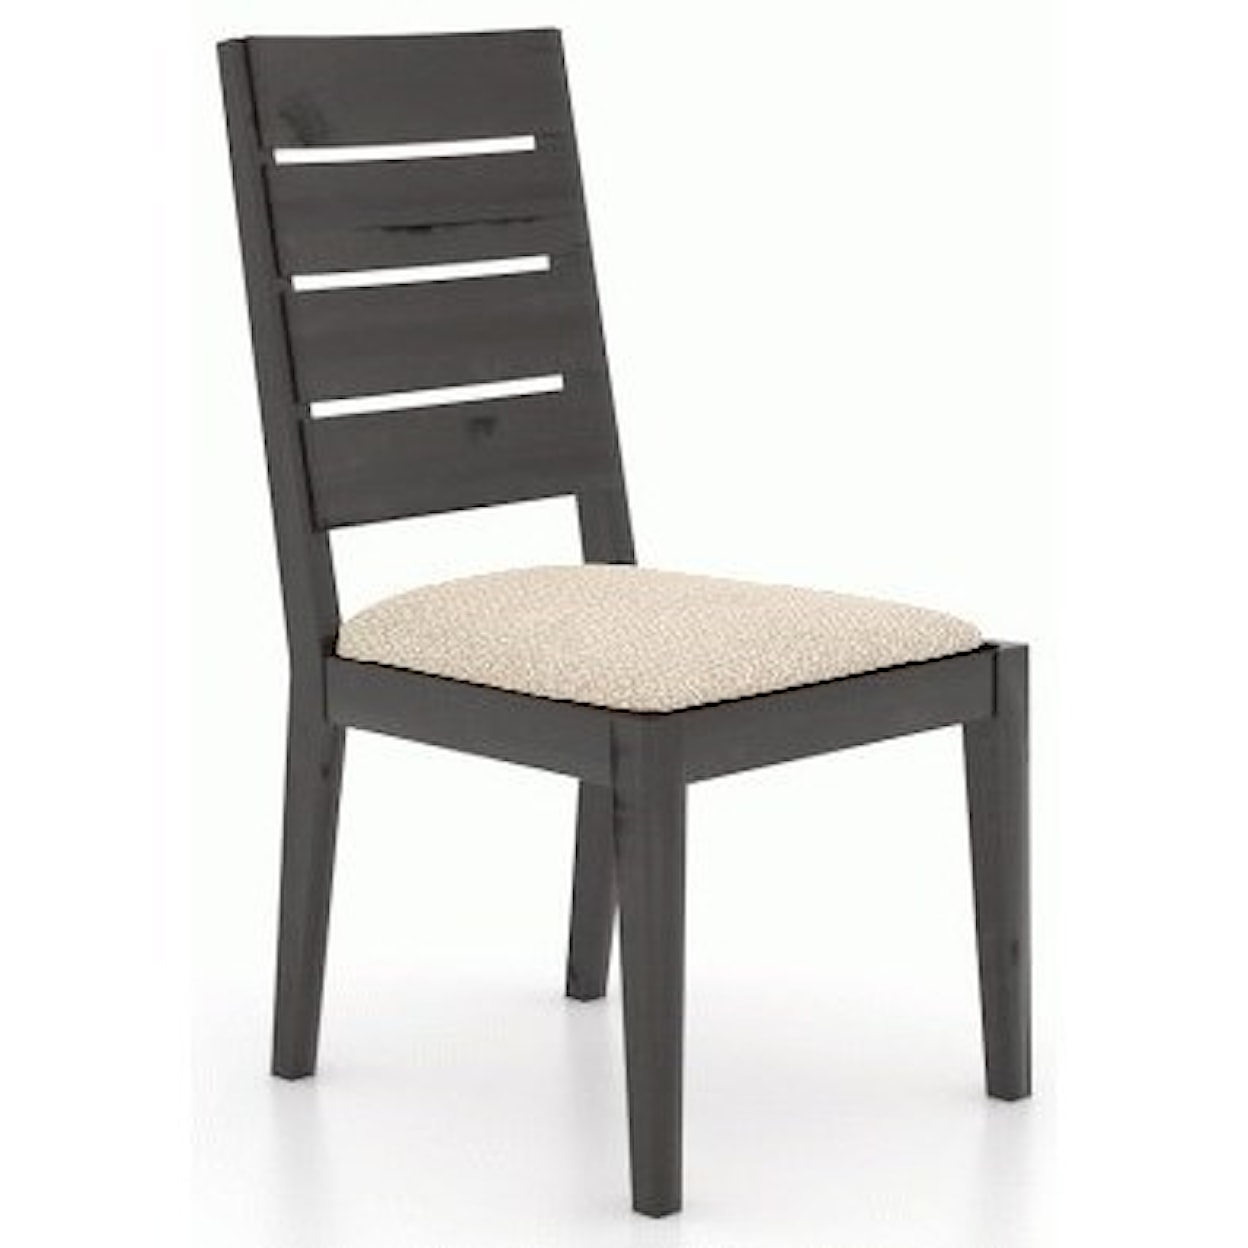 Canadel Loft Customizable Side Chair w/ Upholstered Seat